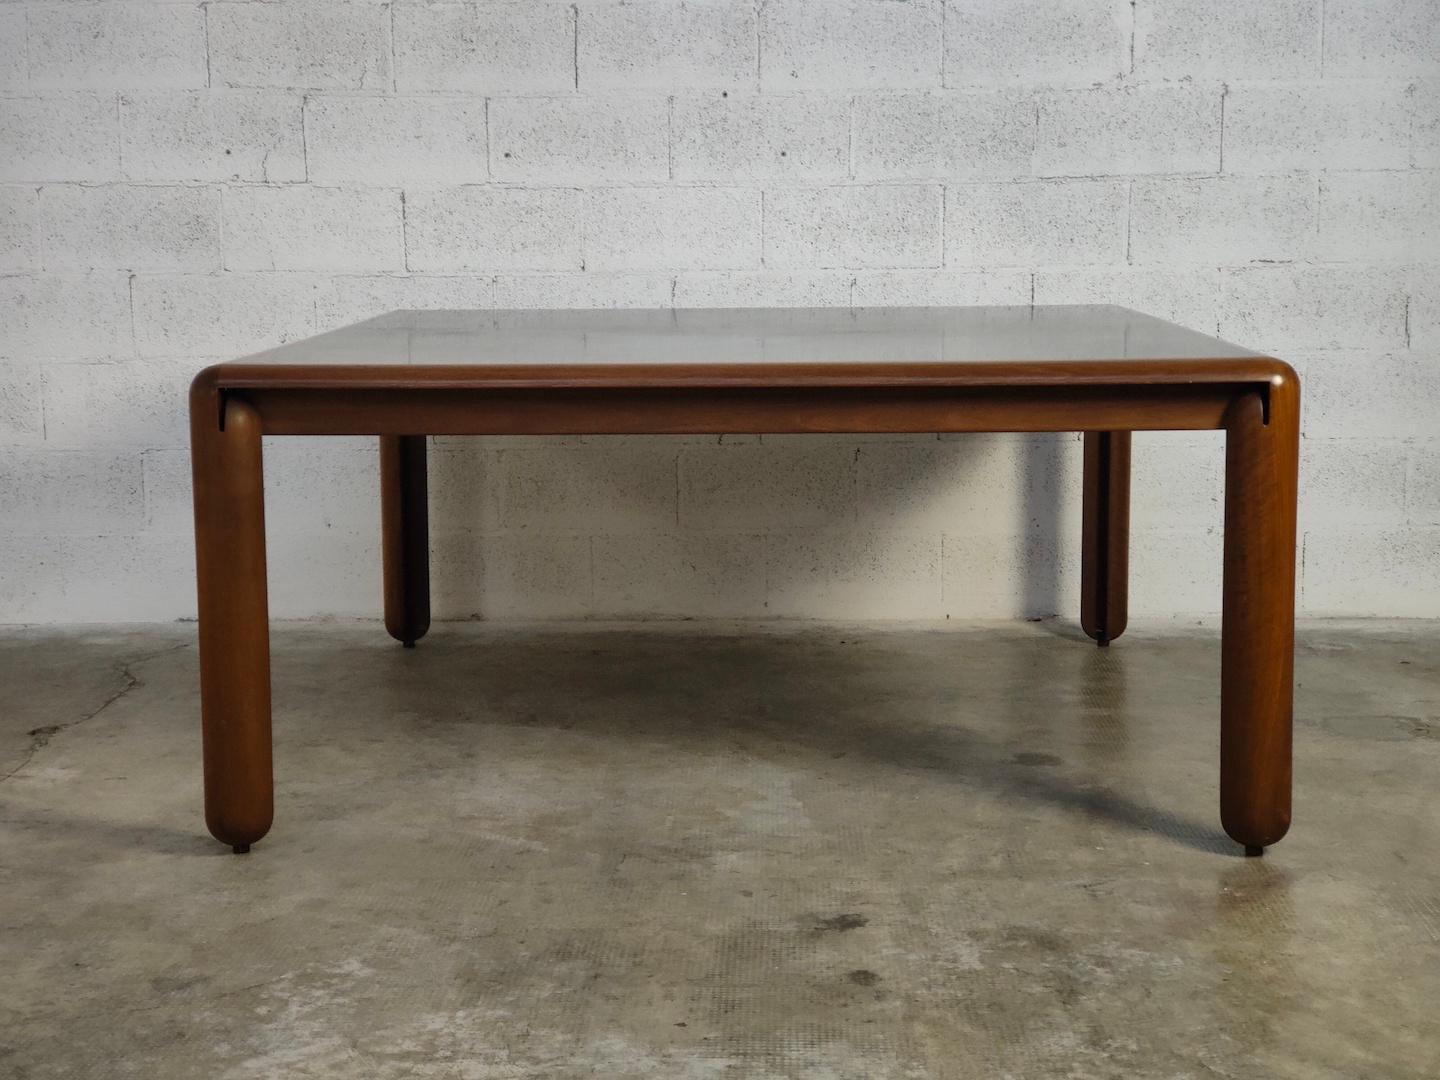 Square walnut table model 781 by Vico Magistretti for Cassina 60s , 70s.
Superb table in solid walnut, top in dark brown aniline.
Cassina Spa is an Italian company operating in the contemporary furniture sector, founded in 1927 in Meda by Cesare